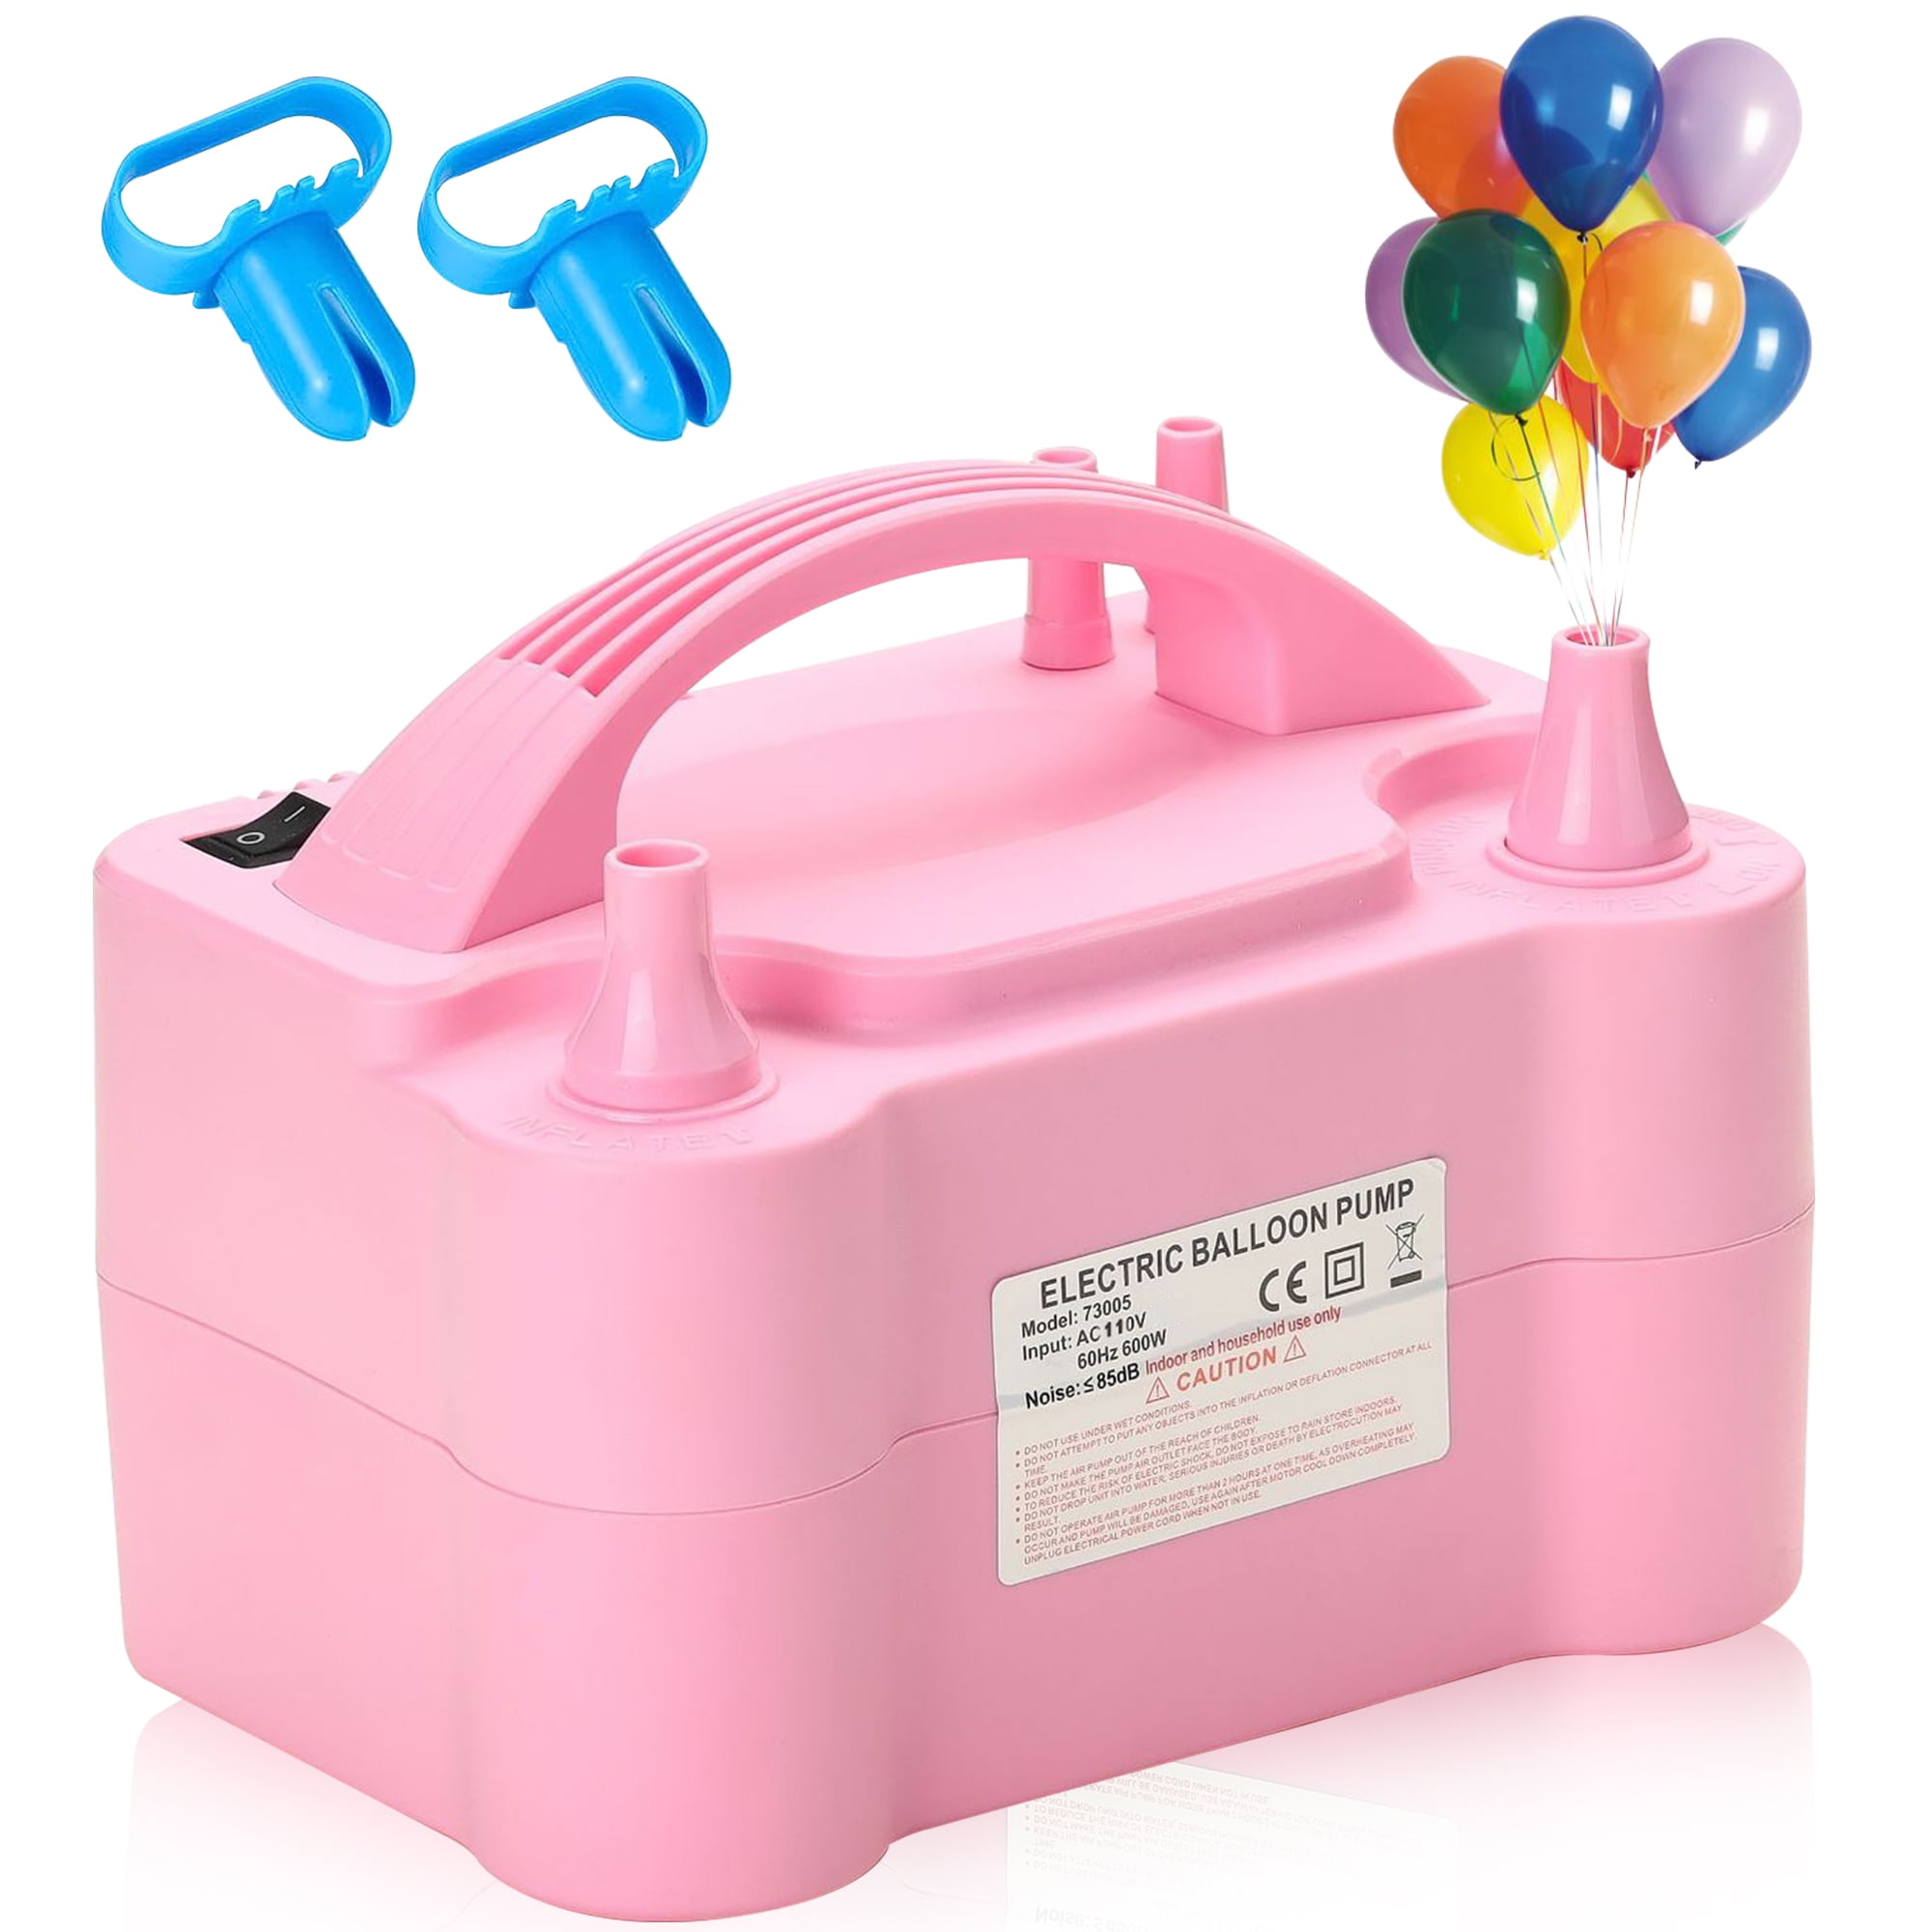 Electric Balloon Pump Machine - Two Nozzle Baloon Pumper Electronic -  Balloon Blower Machine - Latex, Metallic Balloon Air Pump, Bolun Pump,  Balloon Filling Machine - Party Propz: Online Party Supply And